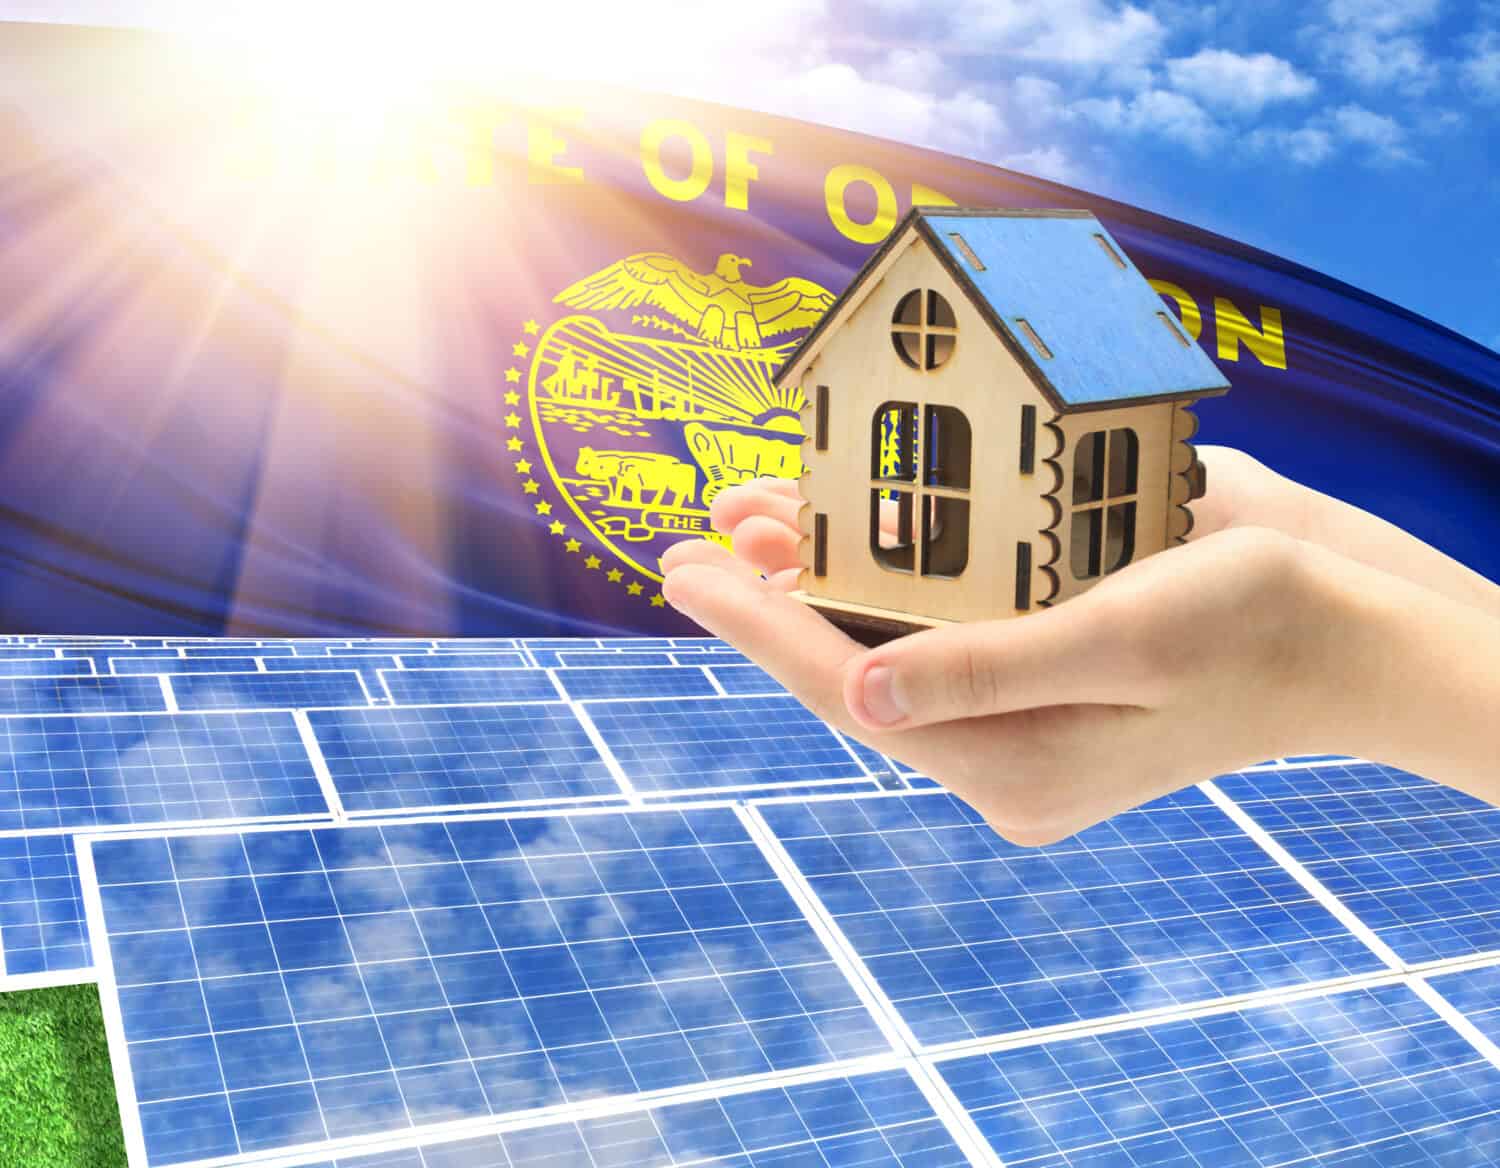 The photo with solar panels and a woman's palm holding a toy house shows the flag State of Oregon in the sun.